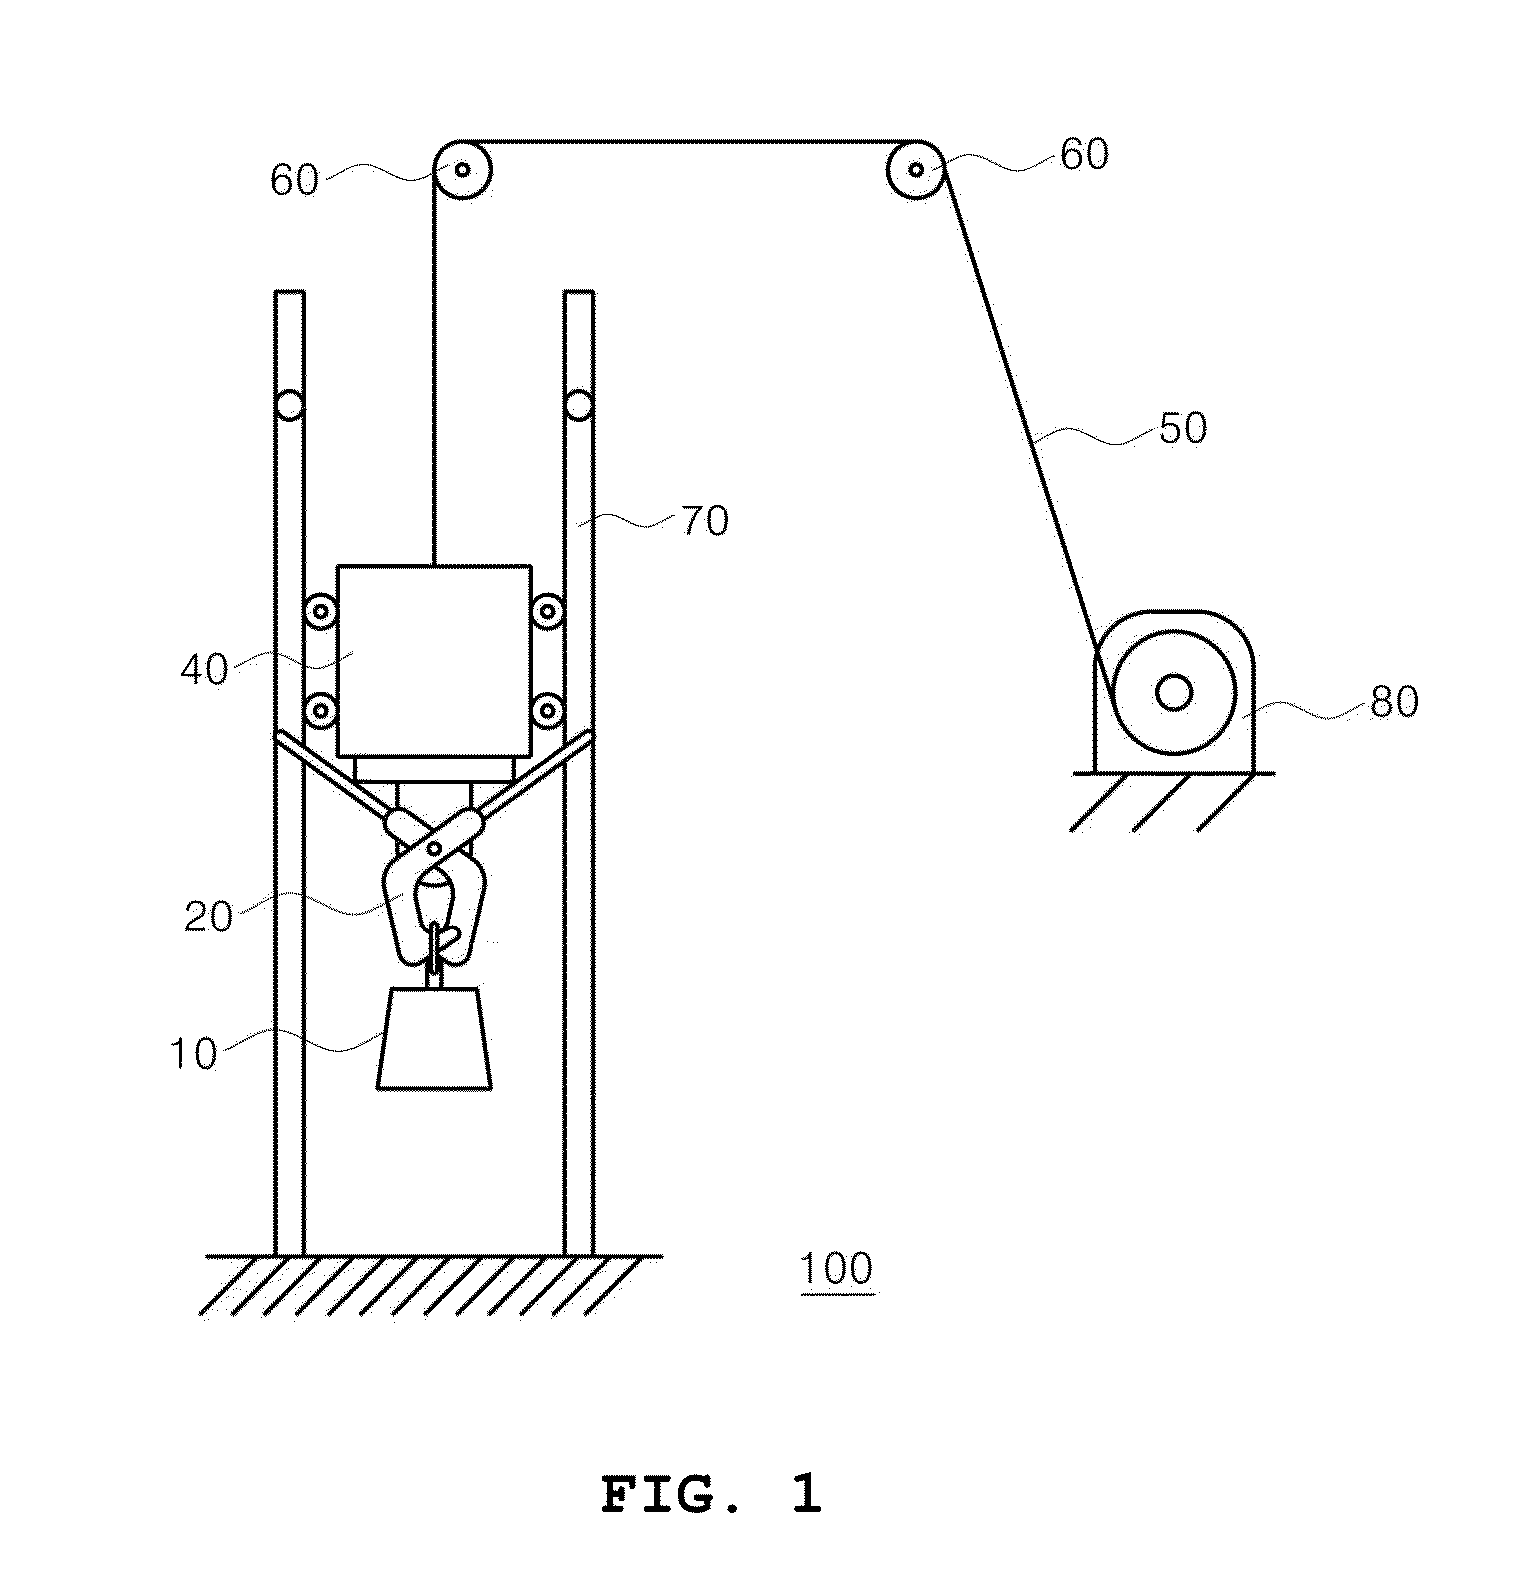 Free drop tester for allowing a free fall impact test of nuclear fuel pellet at adjustable angle